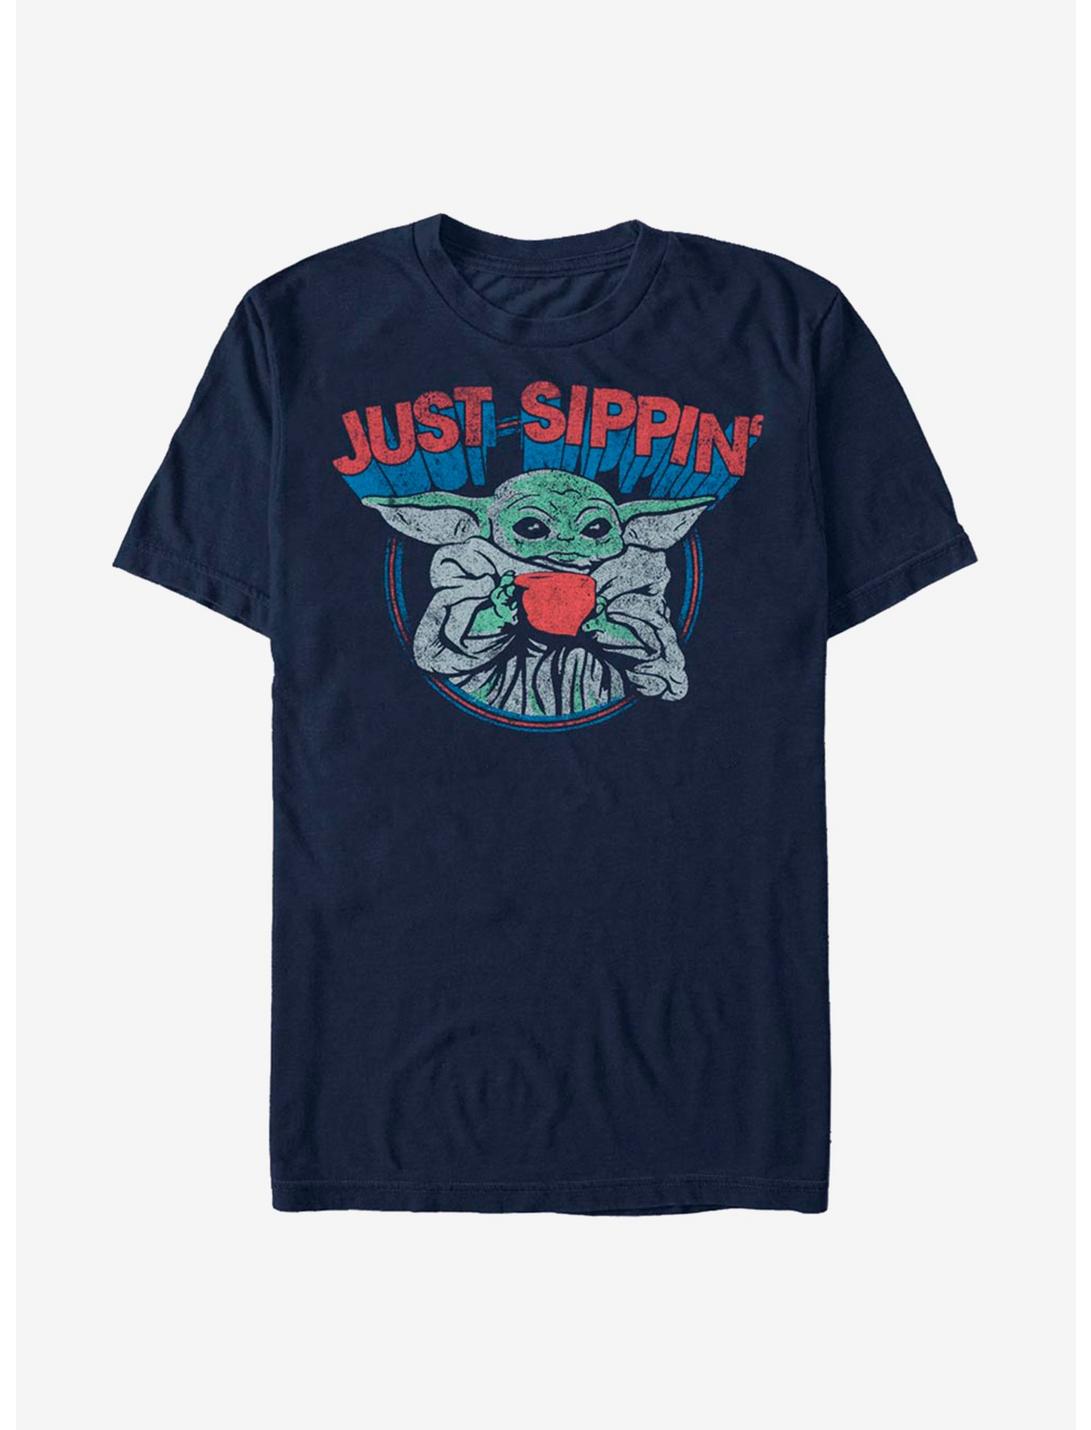 Star Wars The Mandalorian The Child Just Sippin' T-Shirt, NAVY, hi-res